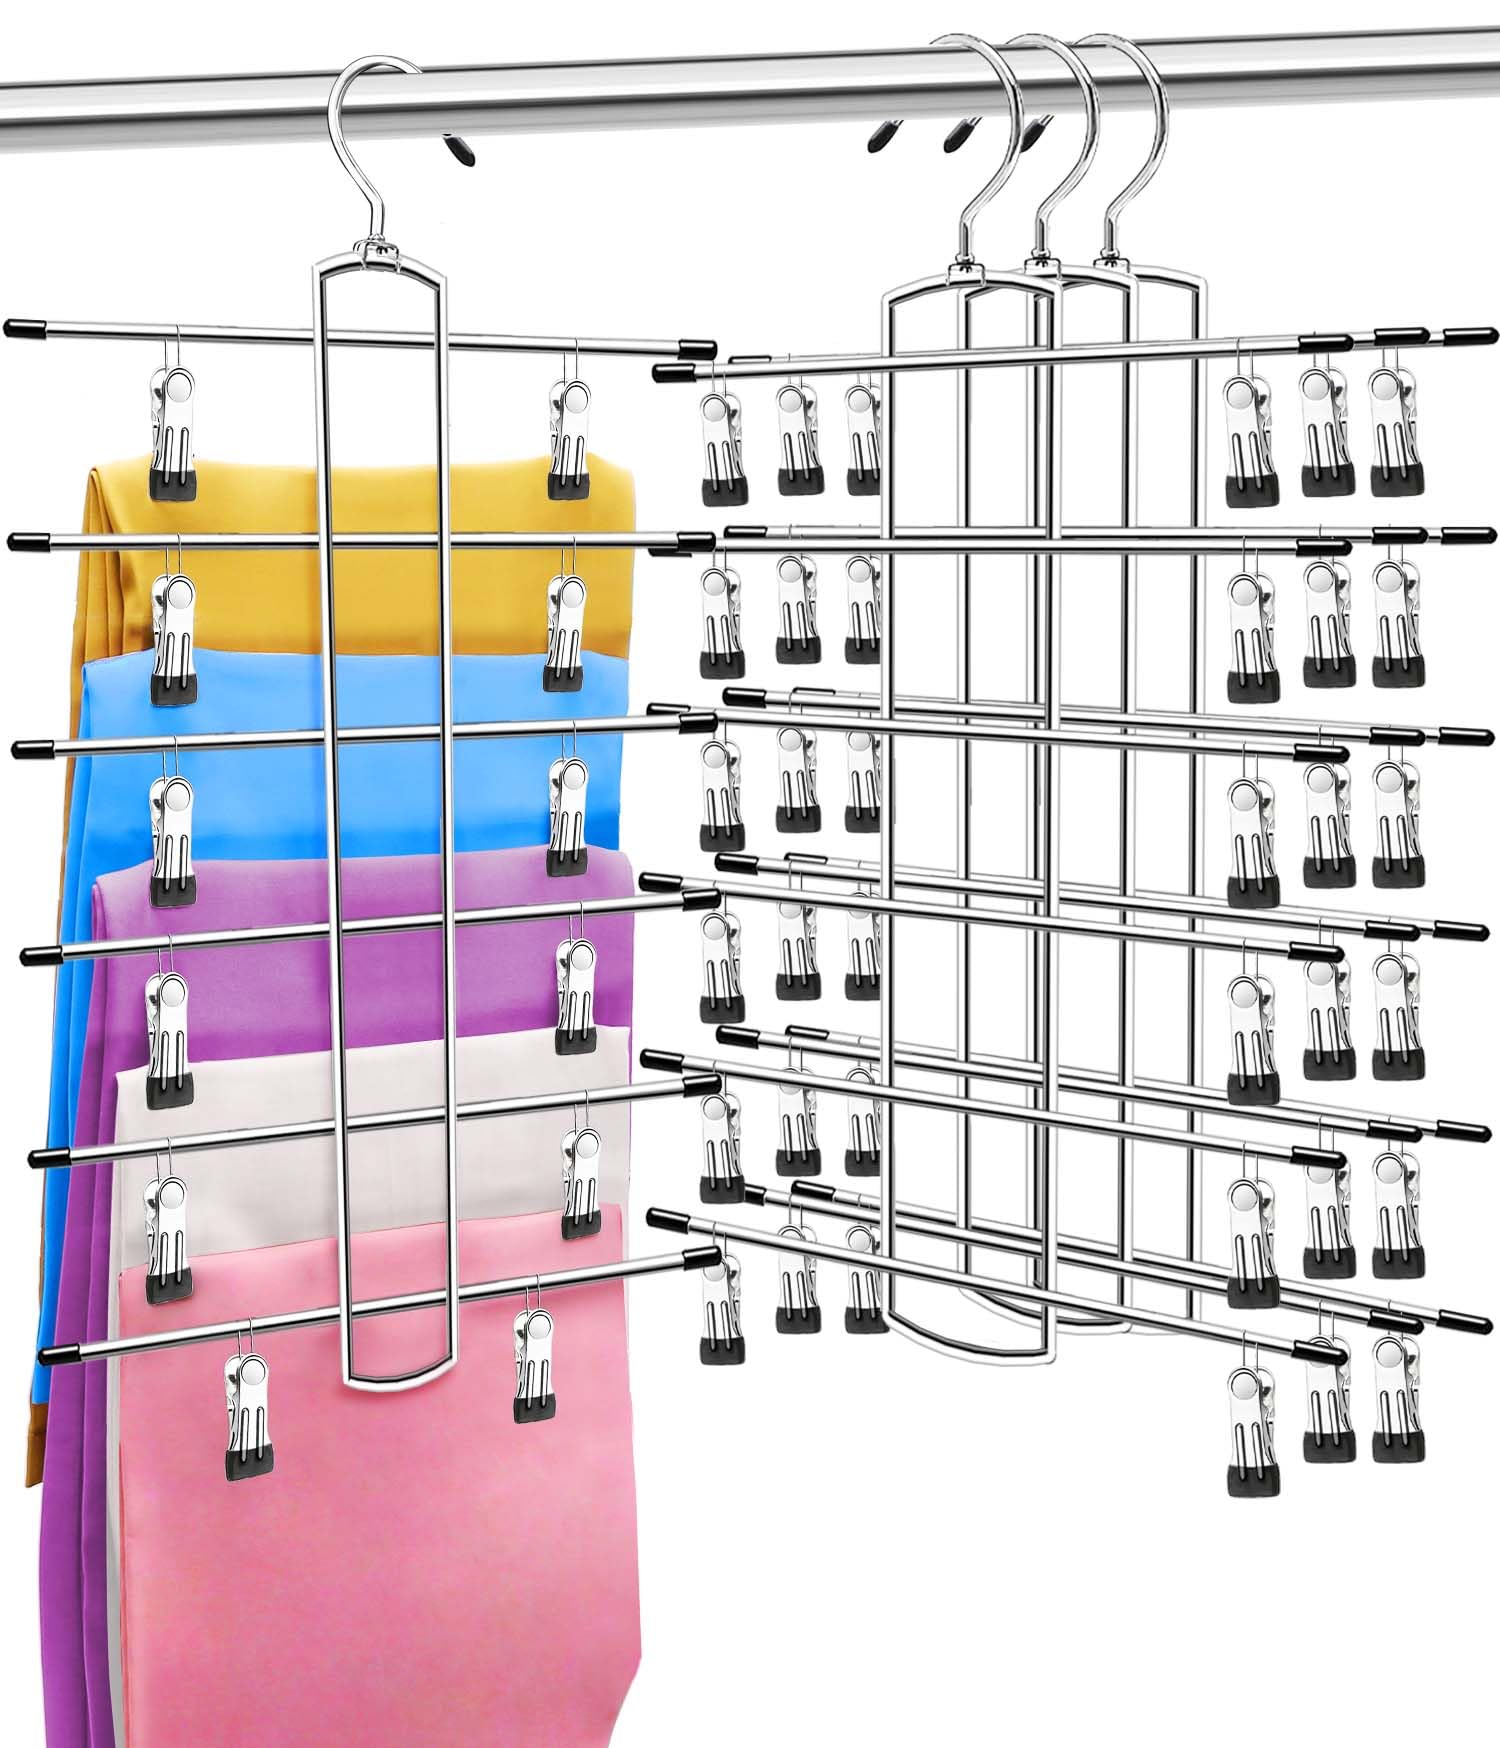 3 Pack Closet-Organizer-Pants-Hangers-Space-Saving,Metal Closet-Organizers-and-Storage,6 Tier Organization and Storage Short Skirt Hangers Cilp,Dorm Room Essentials for College Students Girls Boys Guy